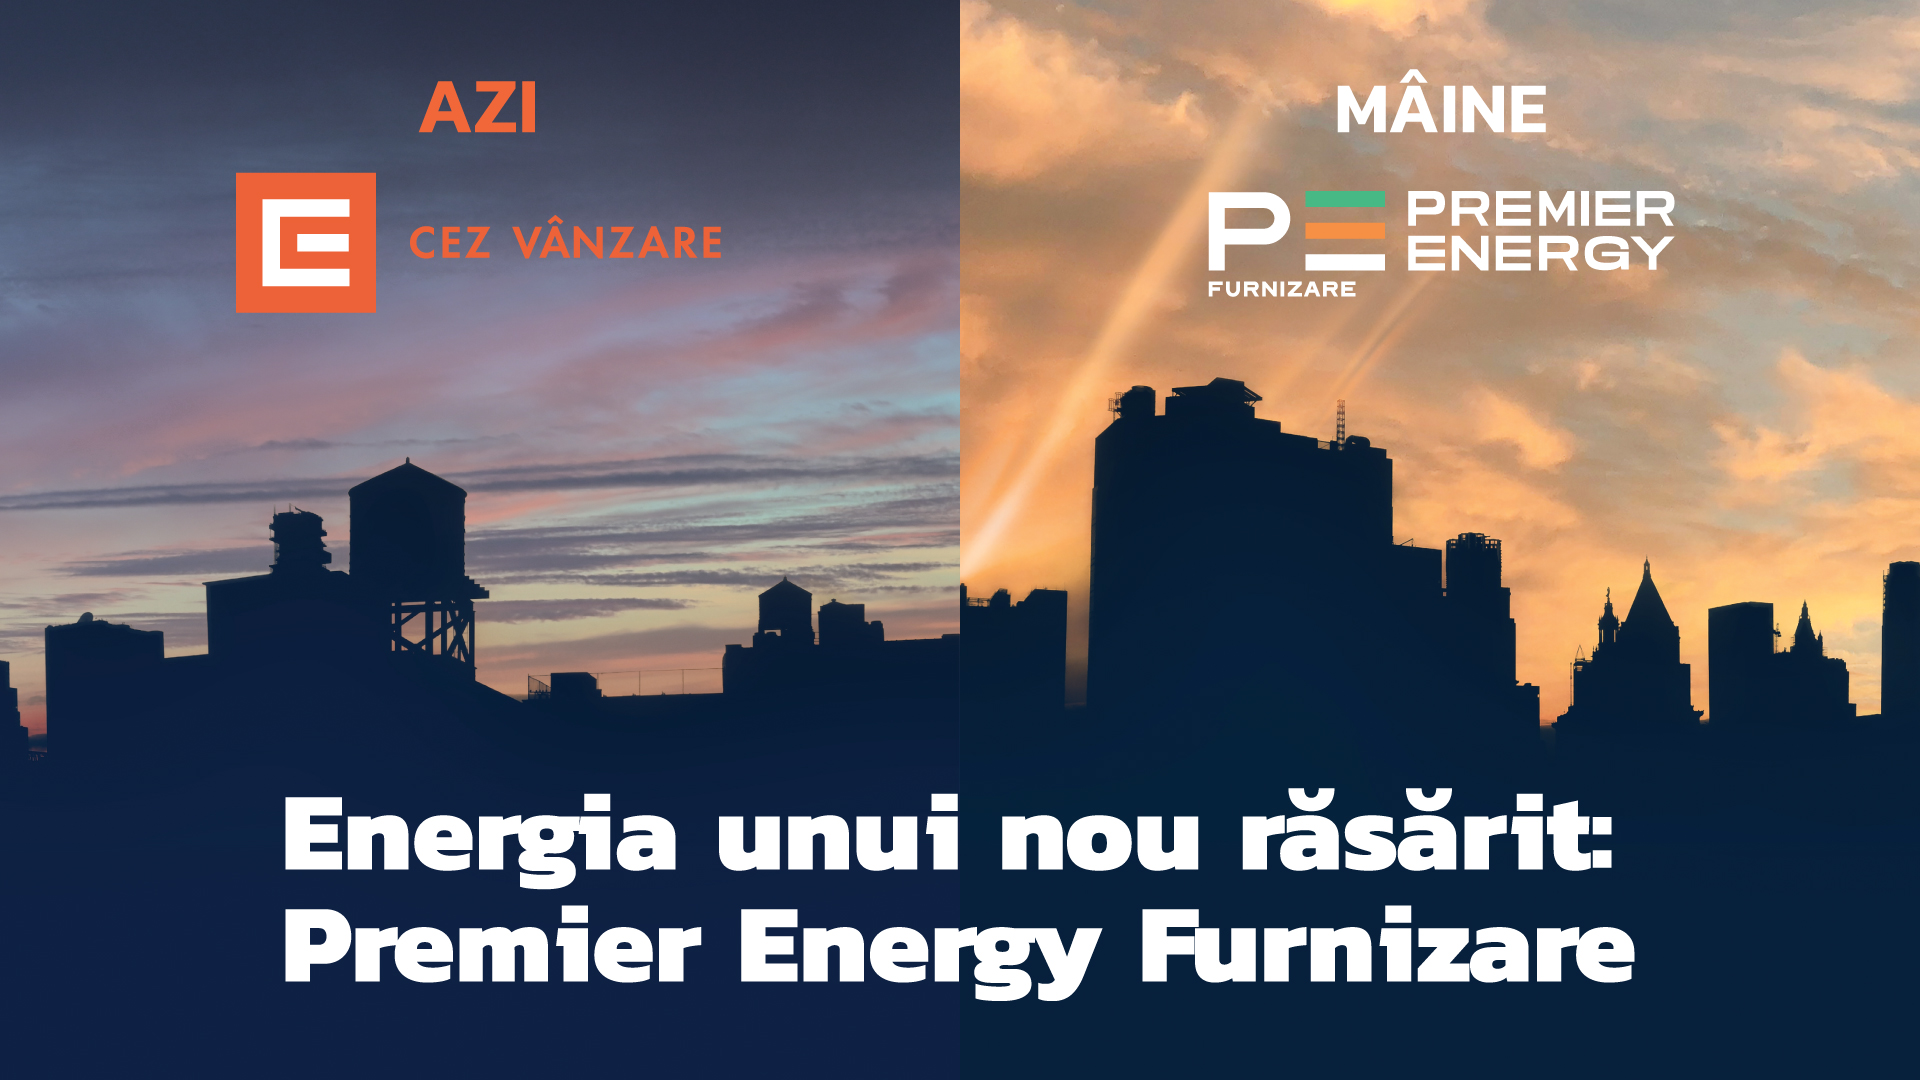 Premier Energy finalizes the acquisition of CEZ Vânzare and reaches 2.4 million customers in Romania. CEZ Vânzare becomes Premier Energy Supply